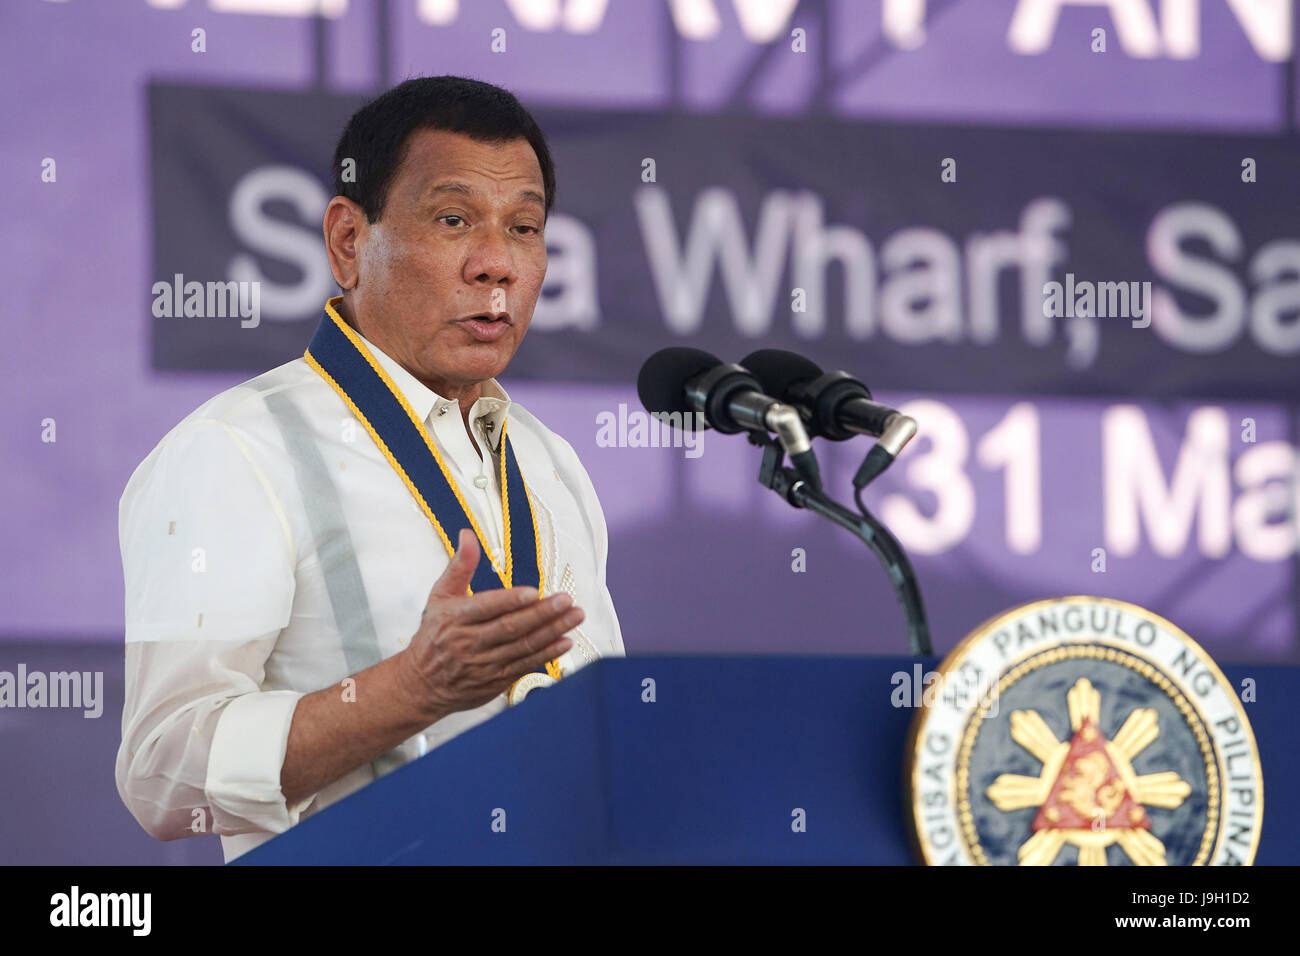 Philippine President Rodrigo Duterte delivers an address on the 119th Anniversary Celebration of the Philippine Navy at the Sasa Wharf May 31, 2017 in Davao City, Mindanao, Philippines. Duterte called to eradicate the emergence of violence extremists in the country as the government battles ISIS forces in Marawi City in Mindanao. Stock Photo